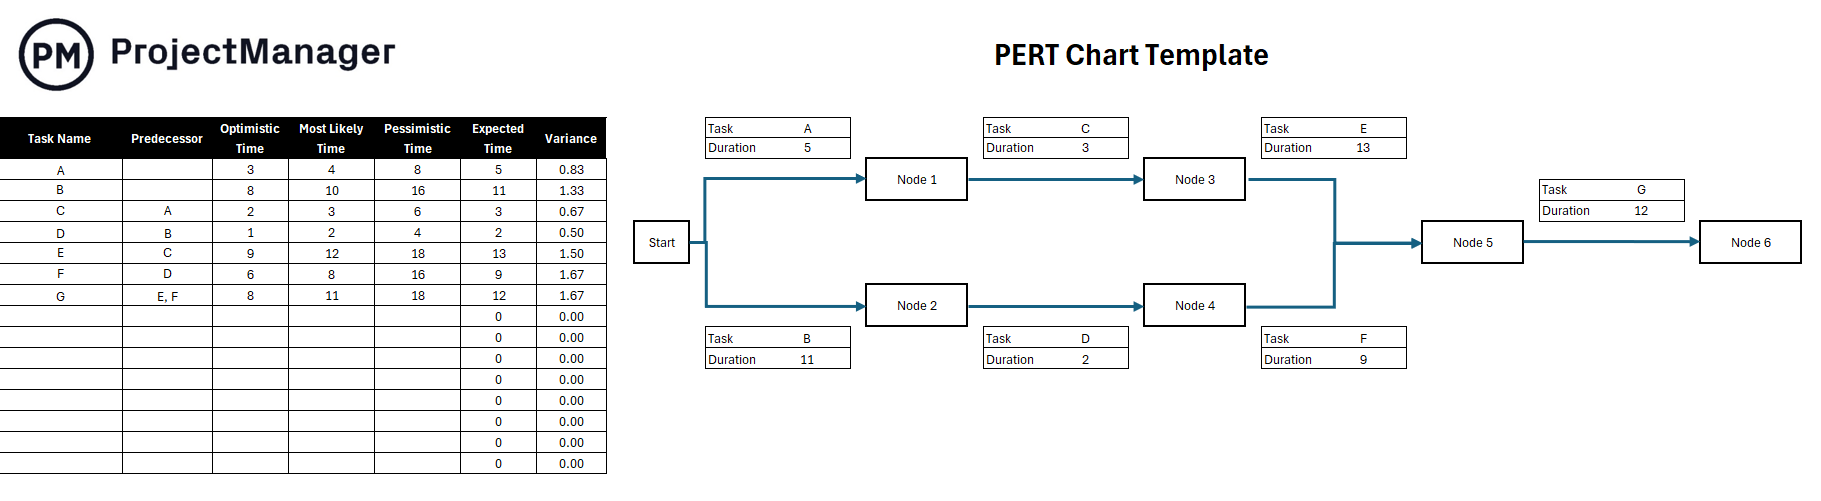 PERT chart template for Excel